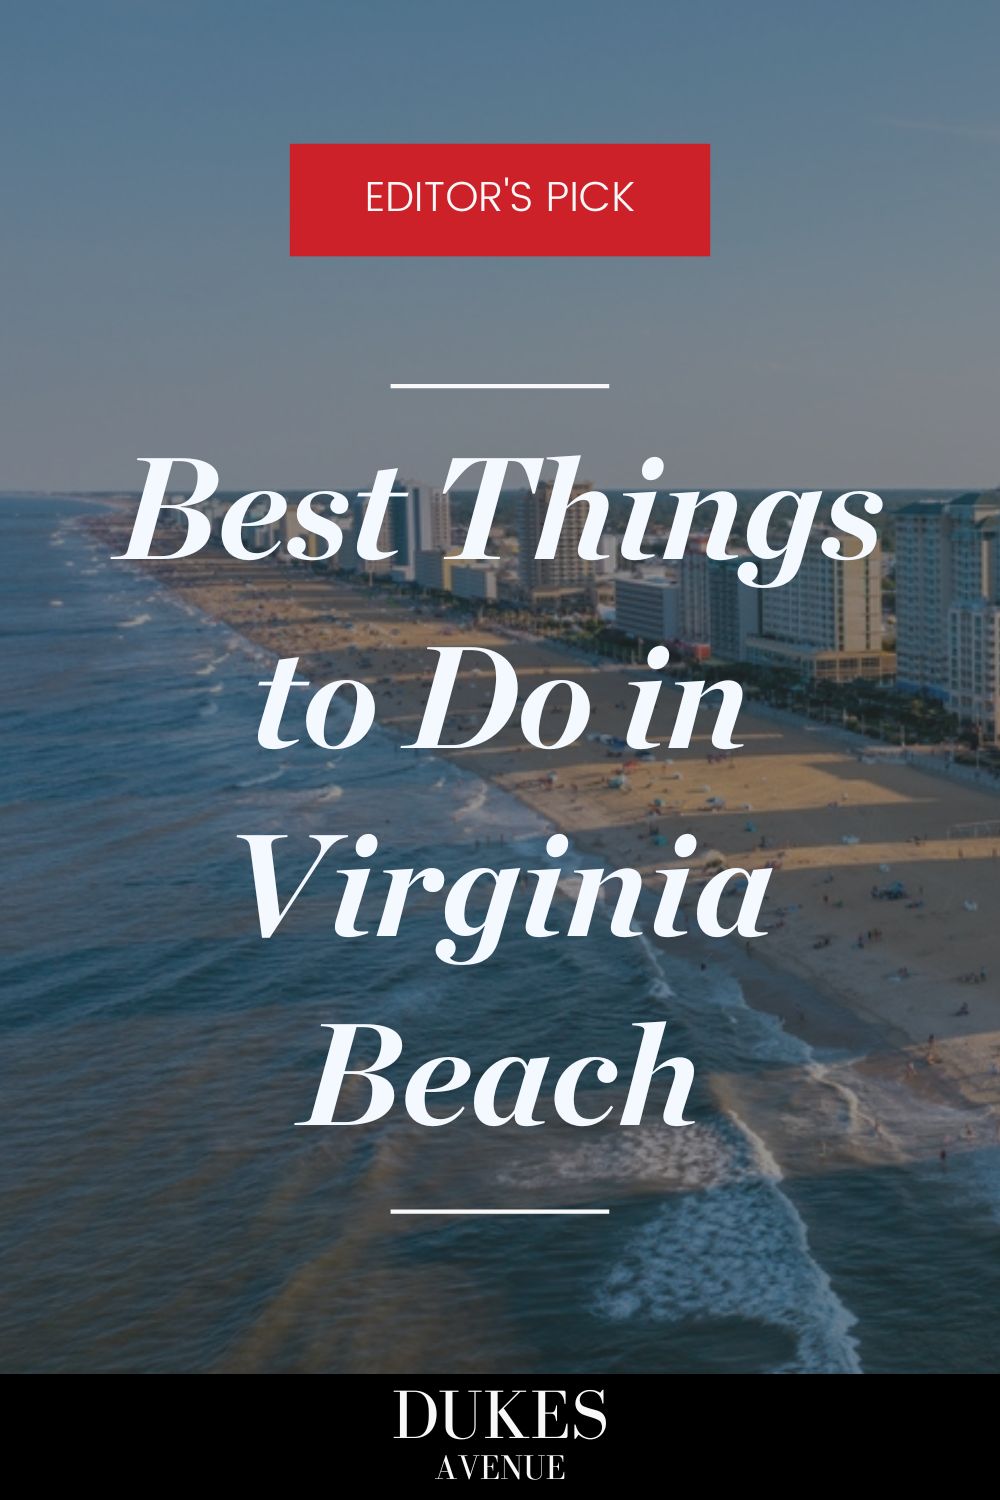 Aerial shot of Virginia Beach with text overlay 'Best Things to Do in Virginia Beach'